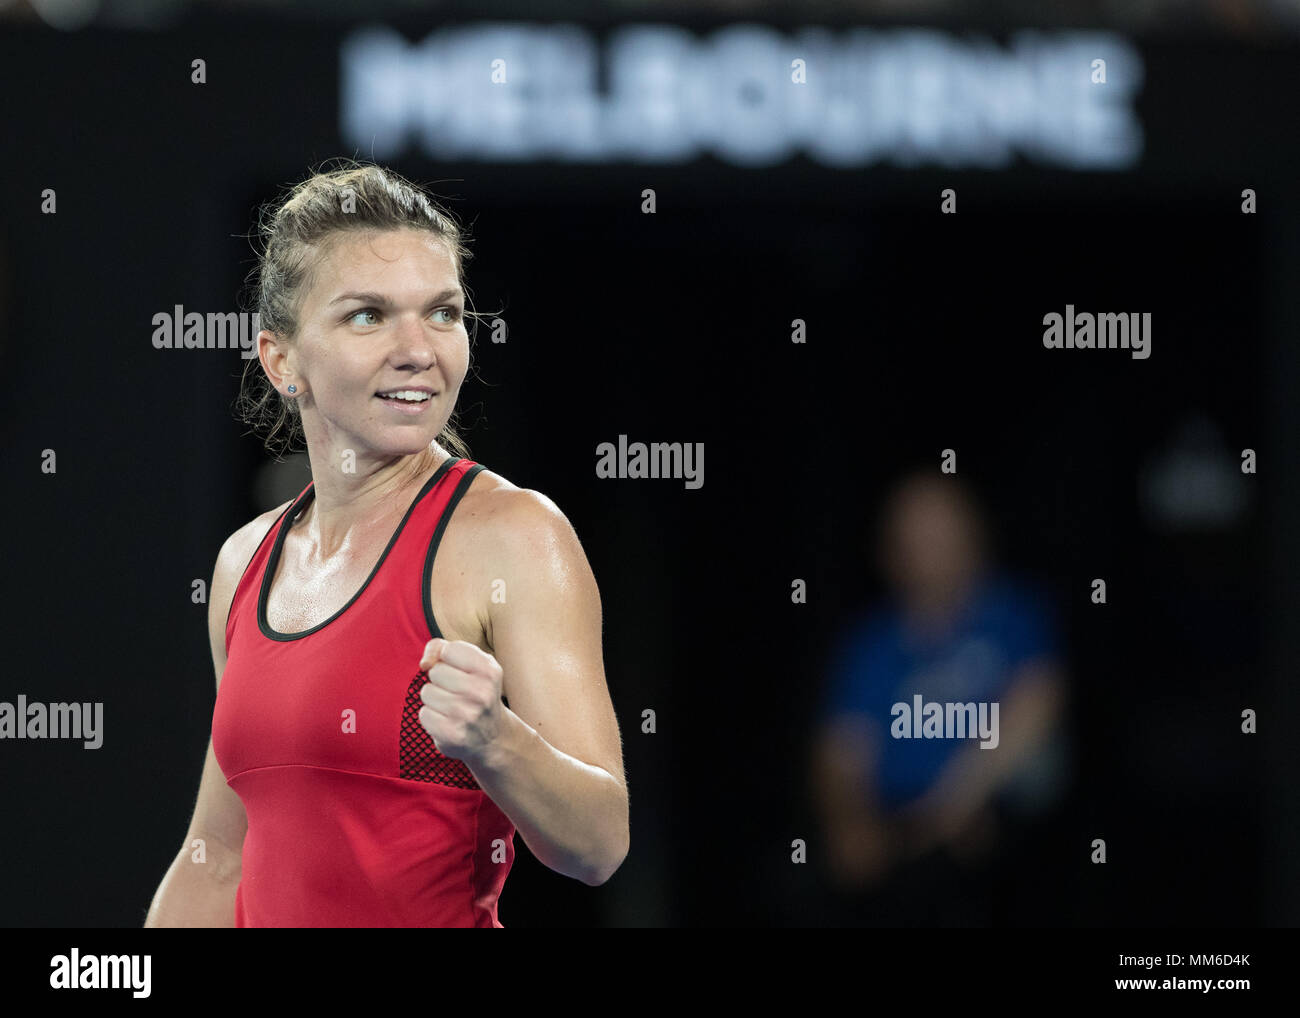 Roumanian  tennis player Simona Halep making a fist and cheering during women's singles match in Australian Open 2018 Tennis Tournament, Melbourne Par Stock Photo